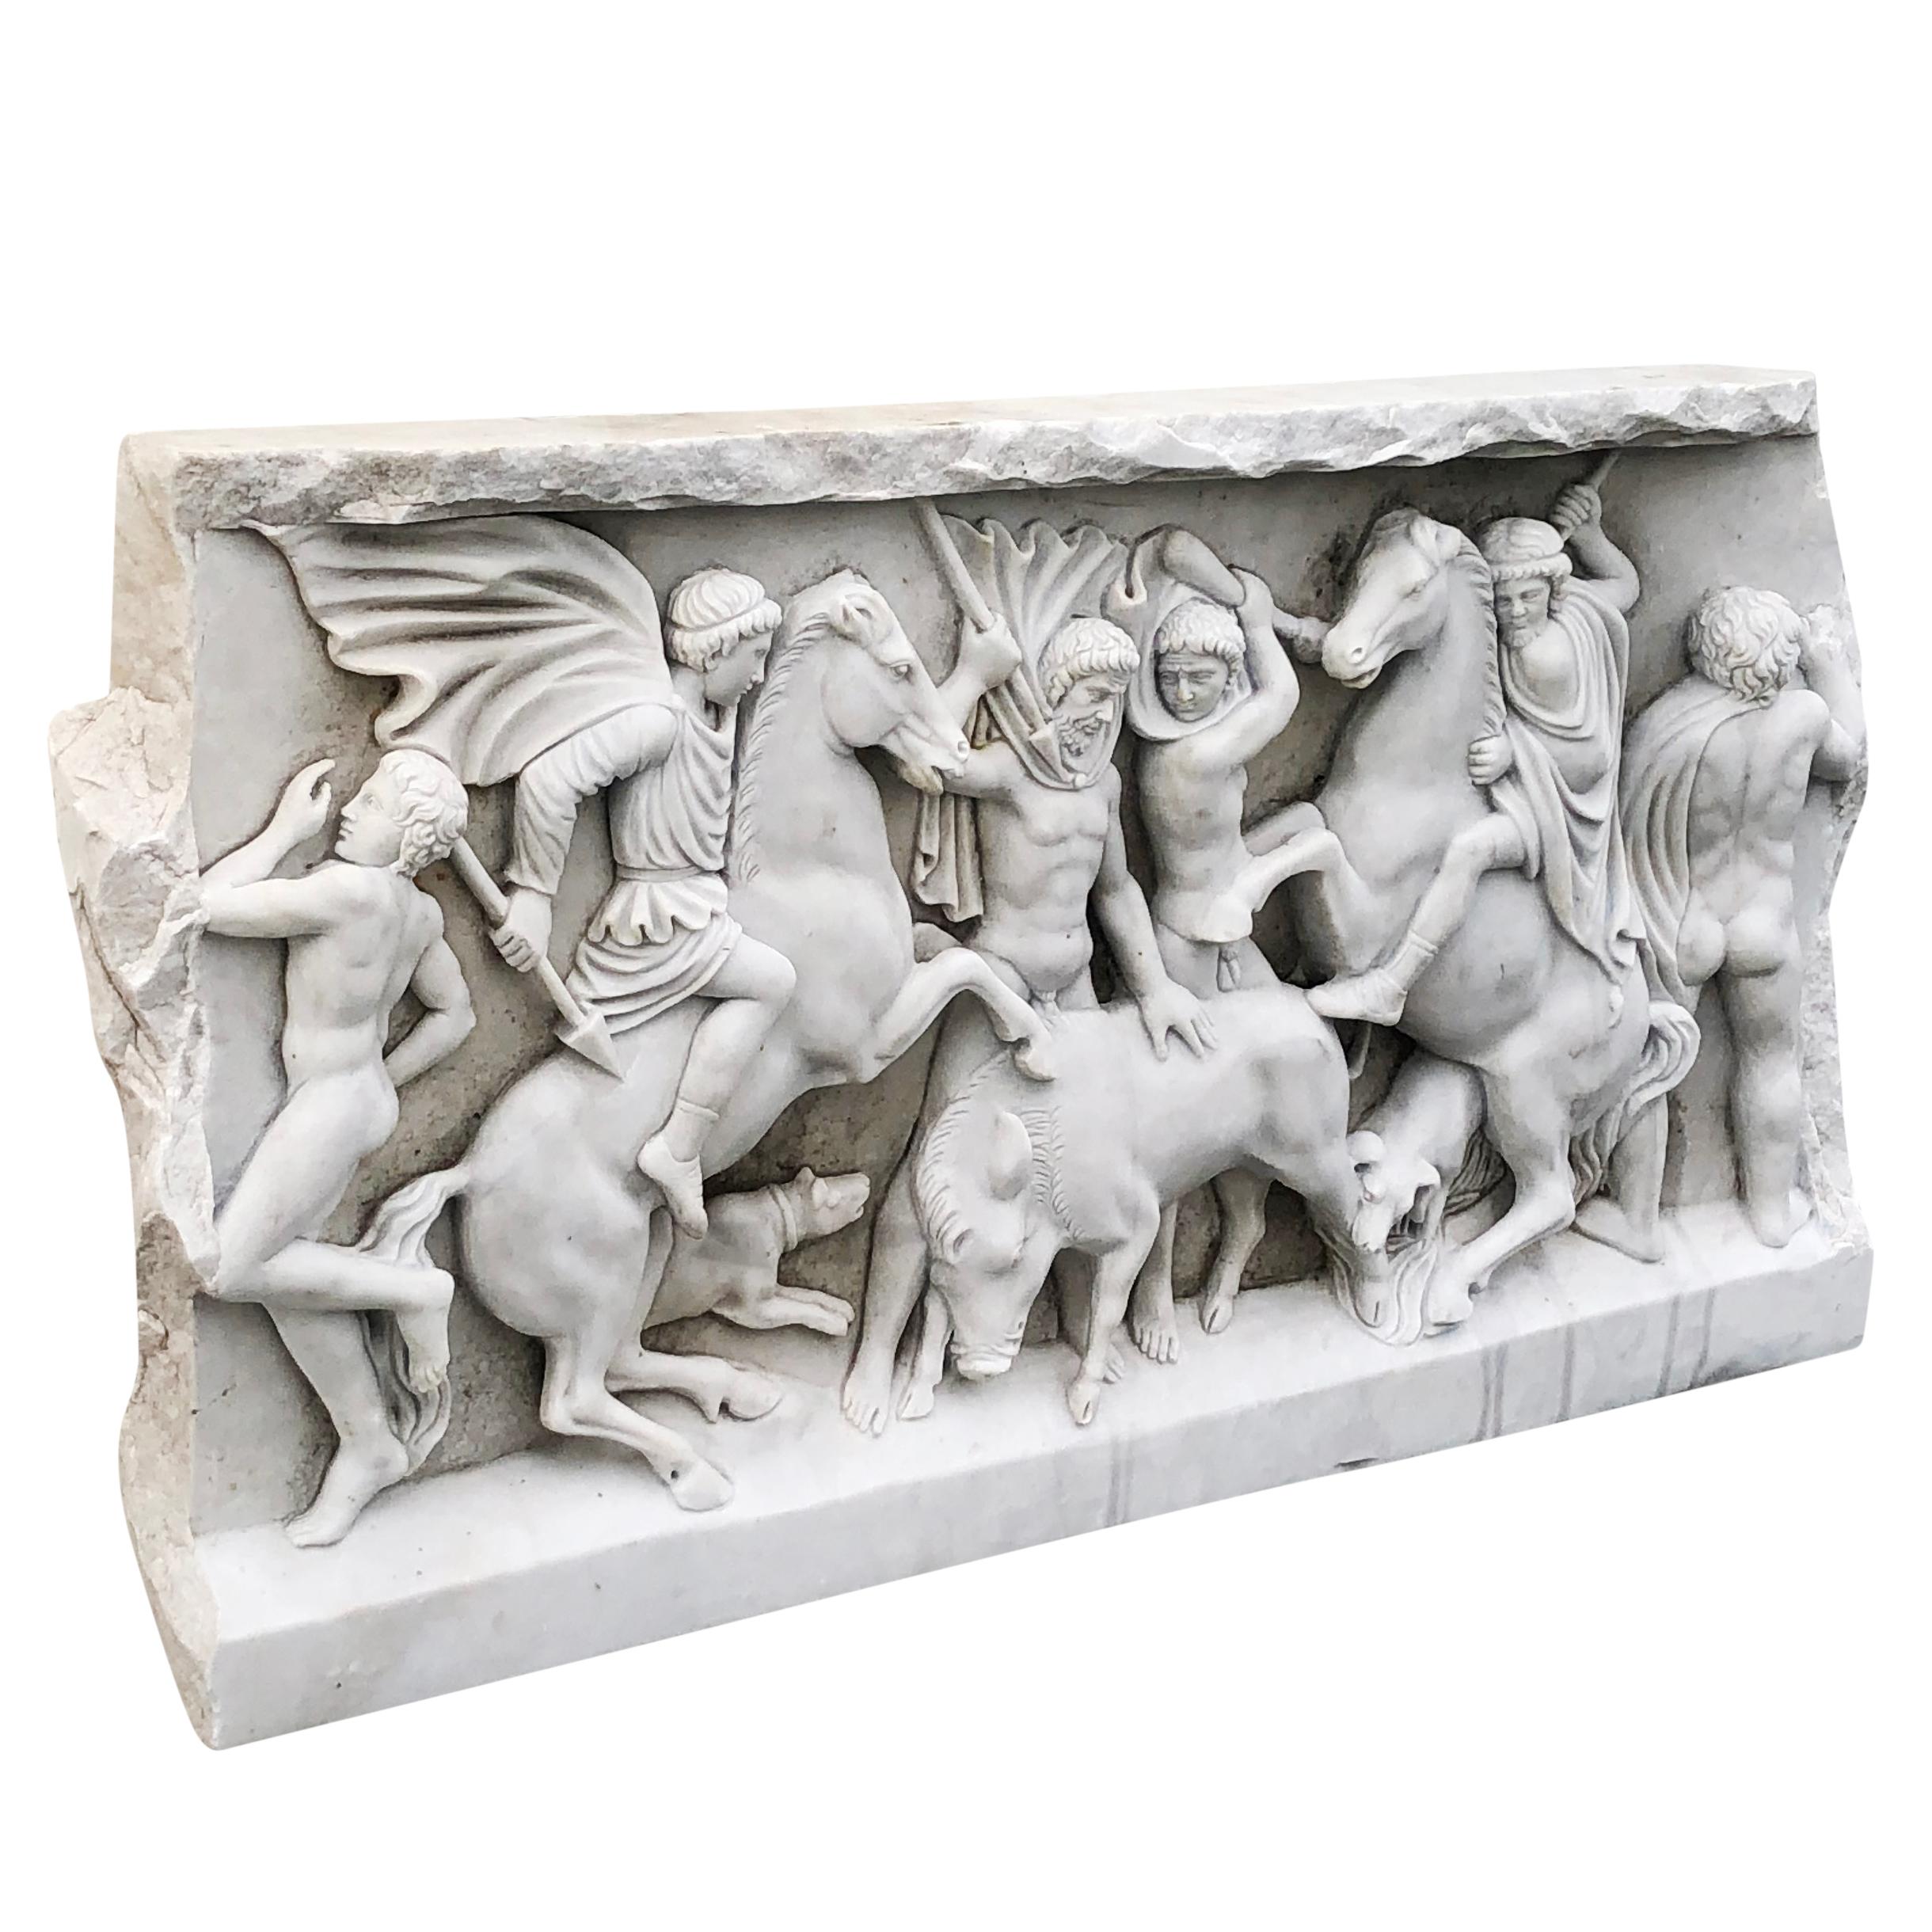 Hand-Carved 19th Century British Carrara Marble Roman Relief Sculpture - Antique Relief For Sale